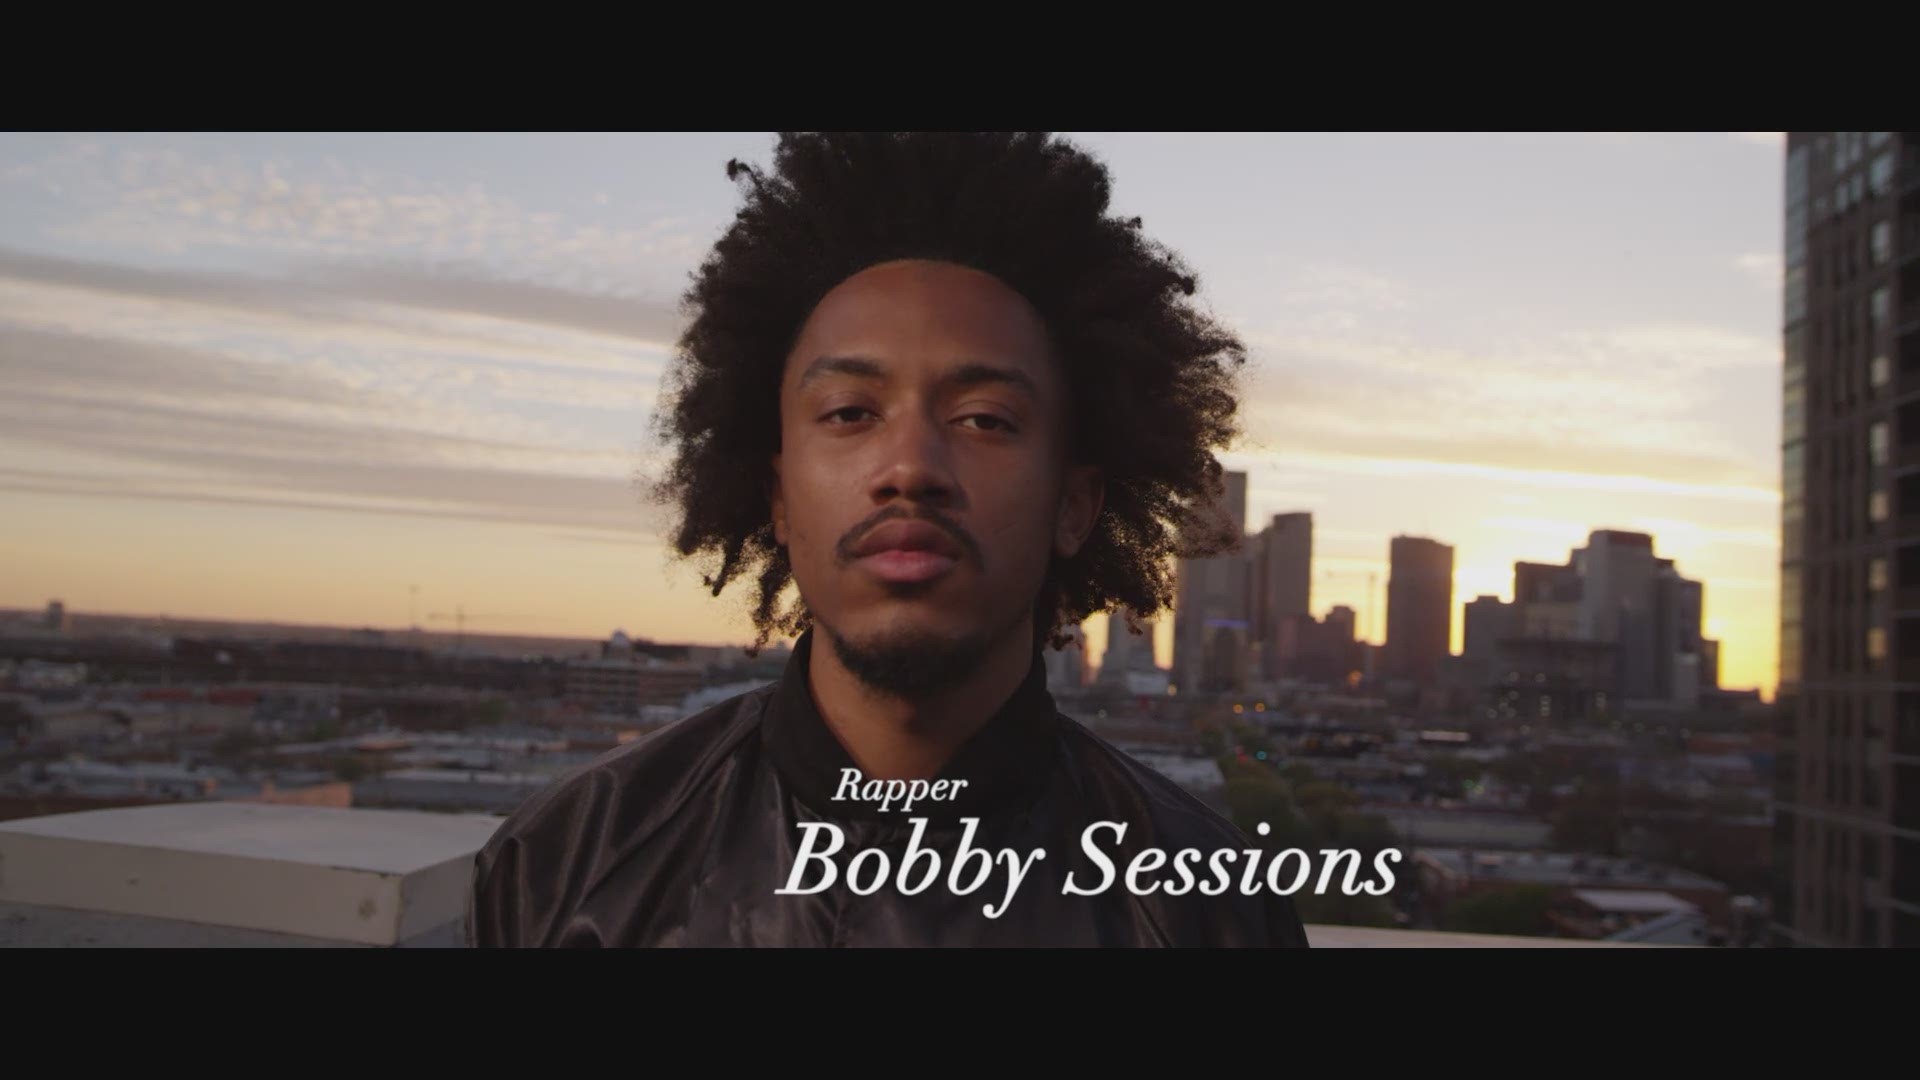 Bobby Sessions has been shaping the sound of Hip Hop in Dallas. Now, he's taking the Dallas sound worldwide.